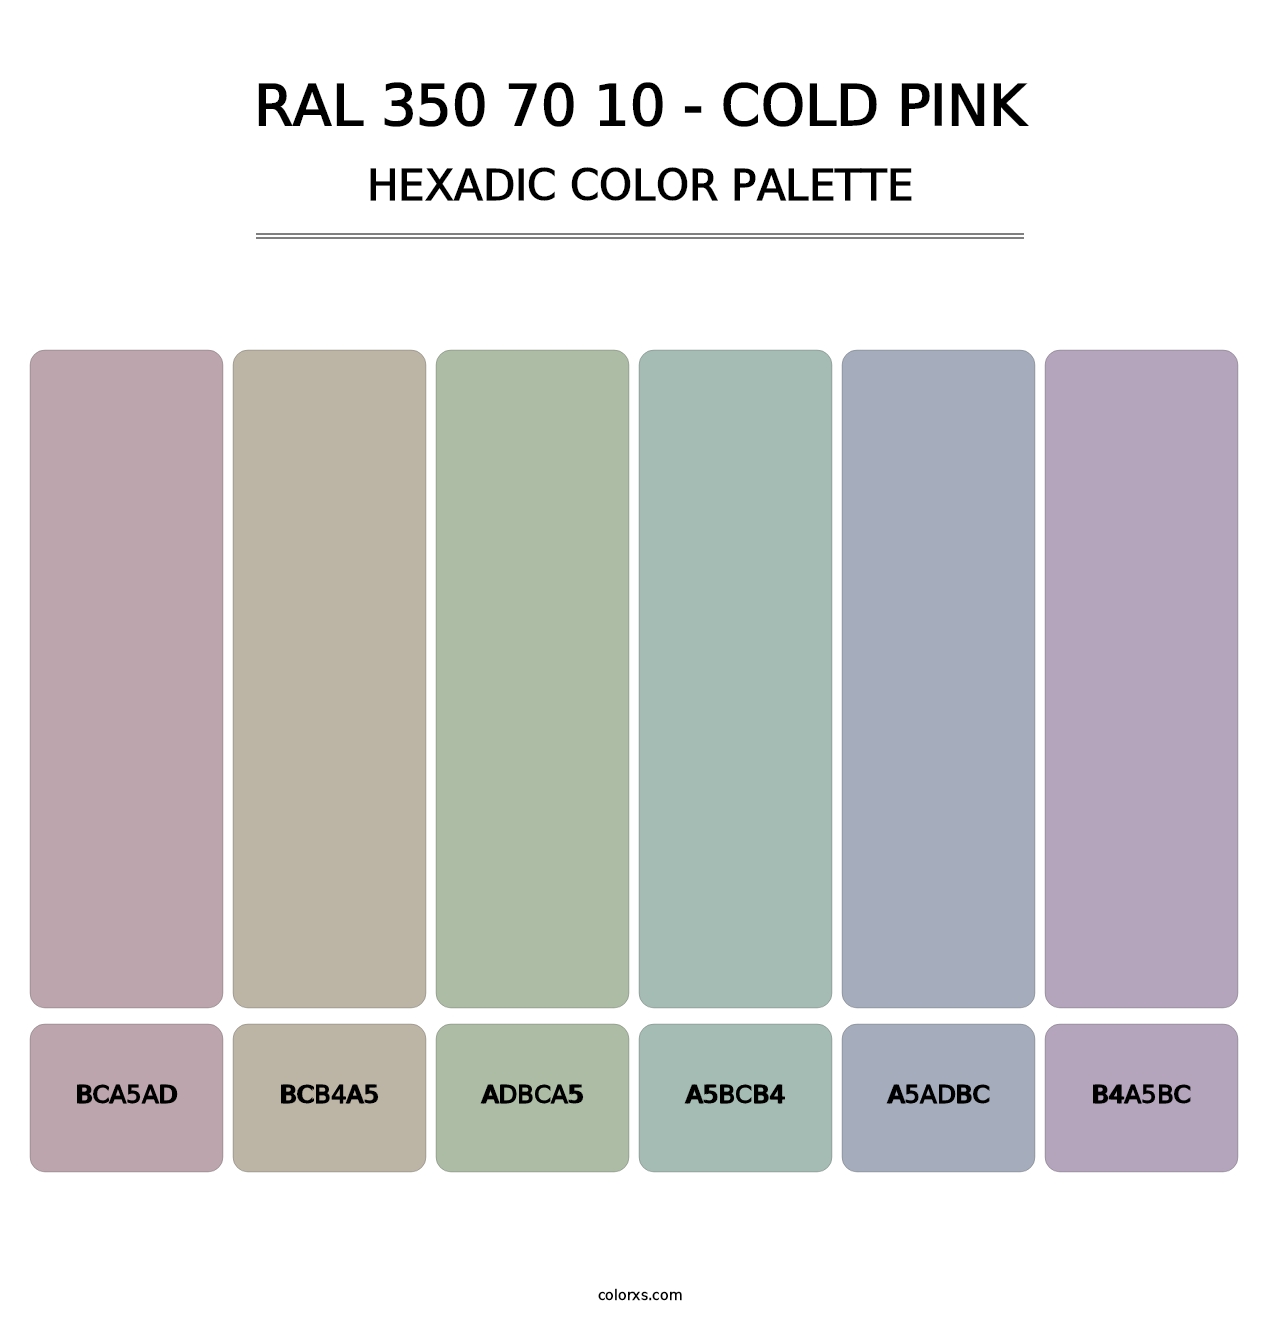 RAL 350 70 10 - Cold Pink - Hexadic Color Palette